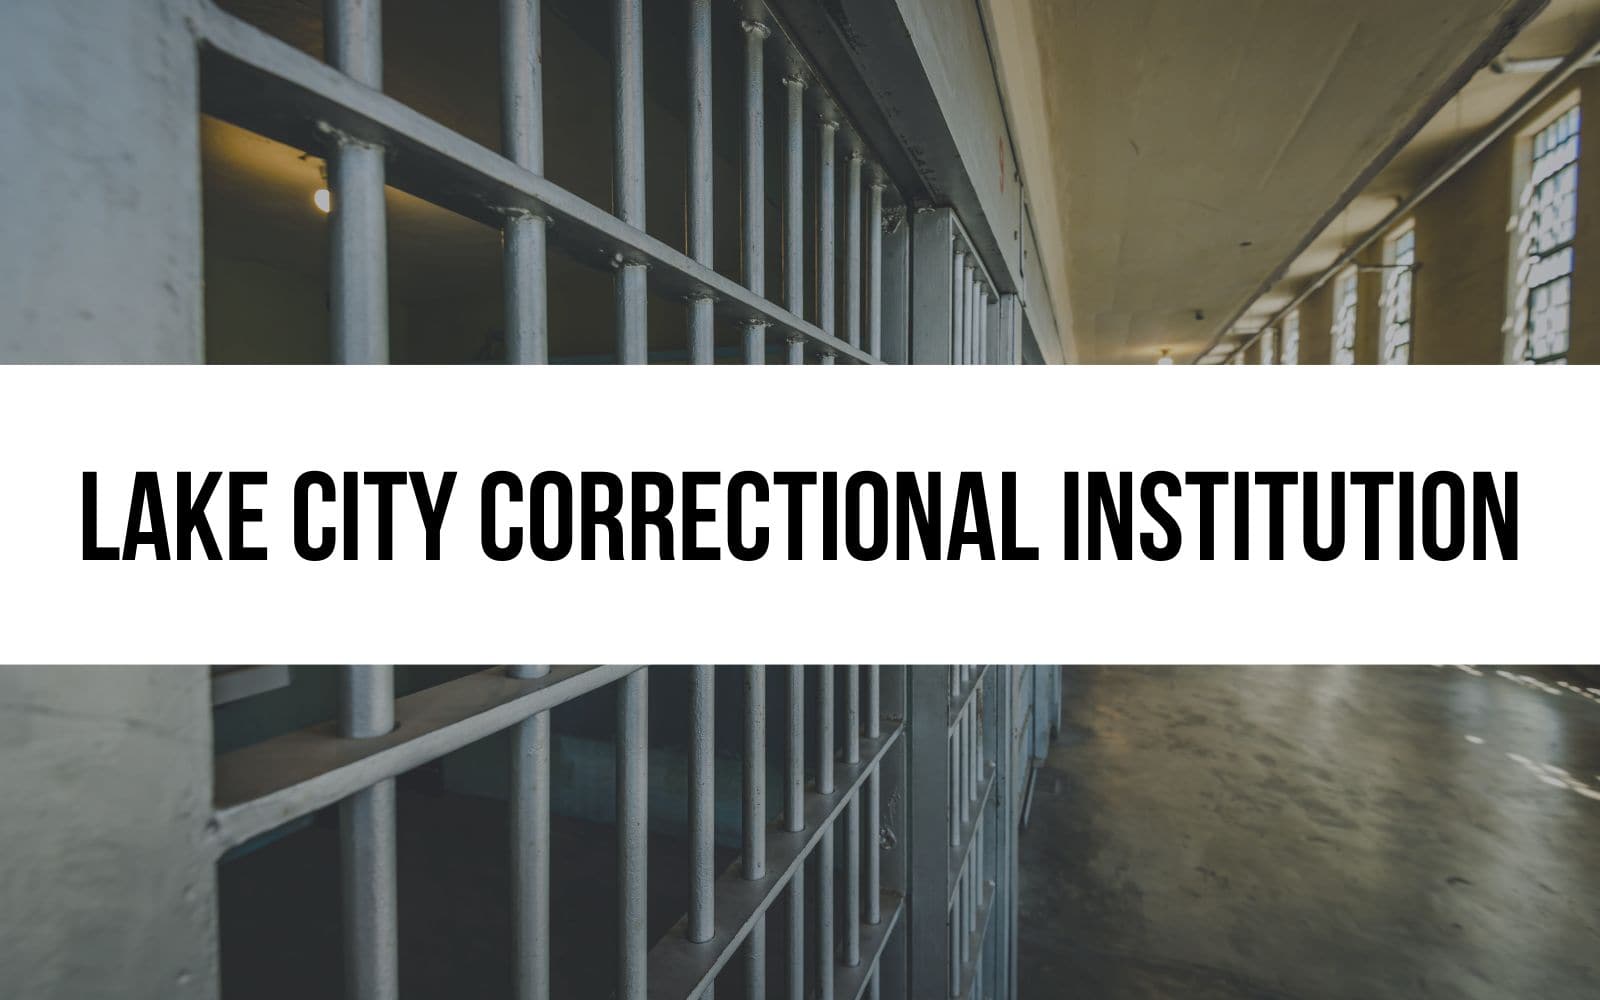 Lake City Correctional Institution: History and Facilities